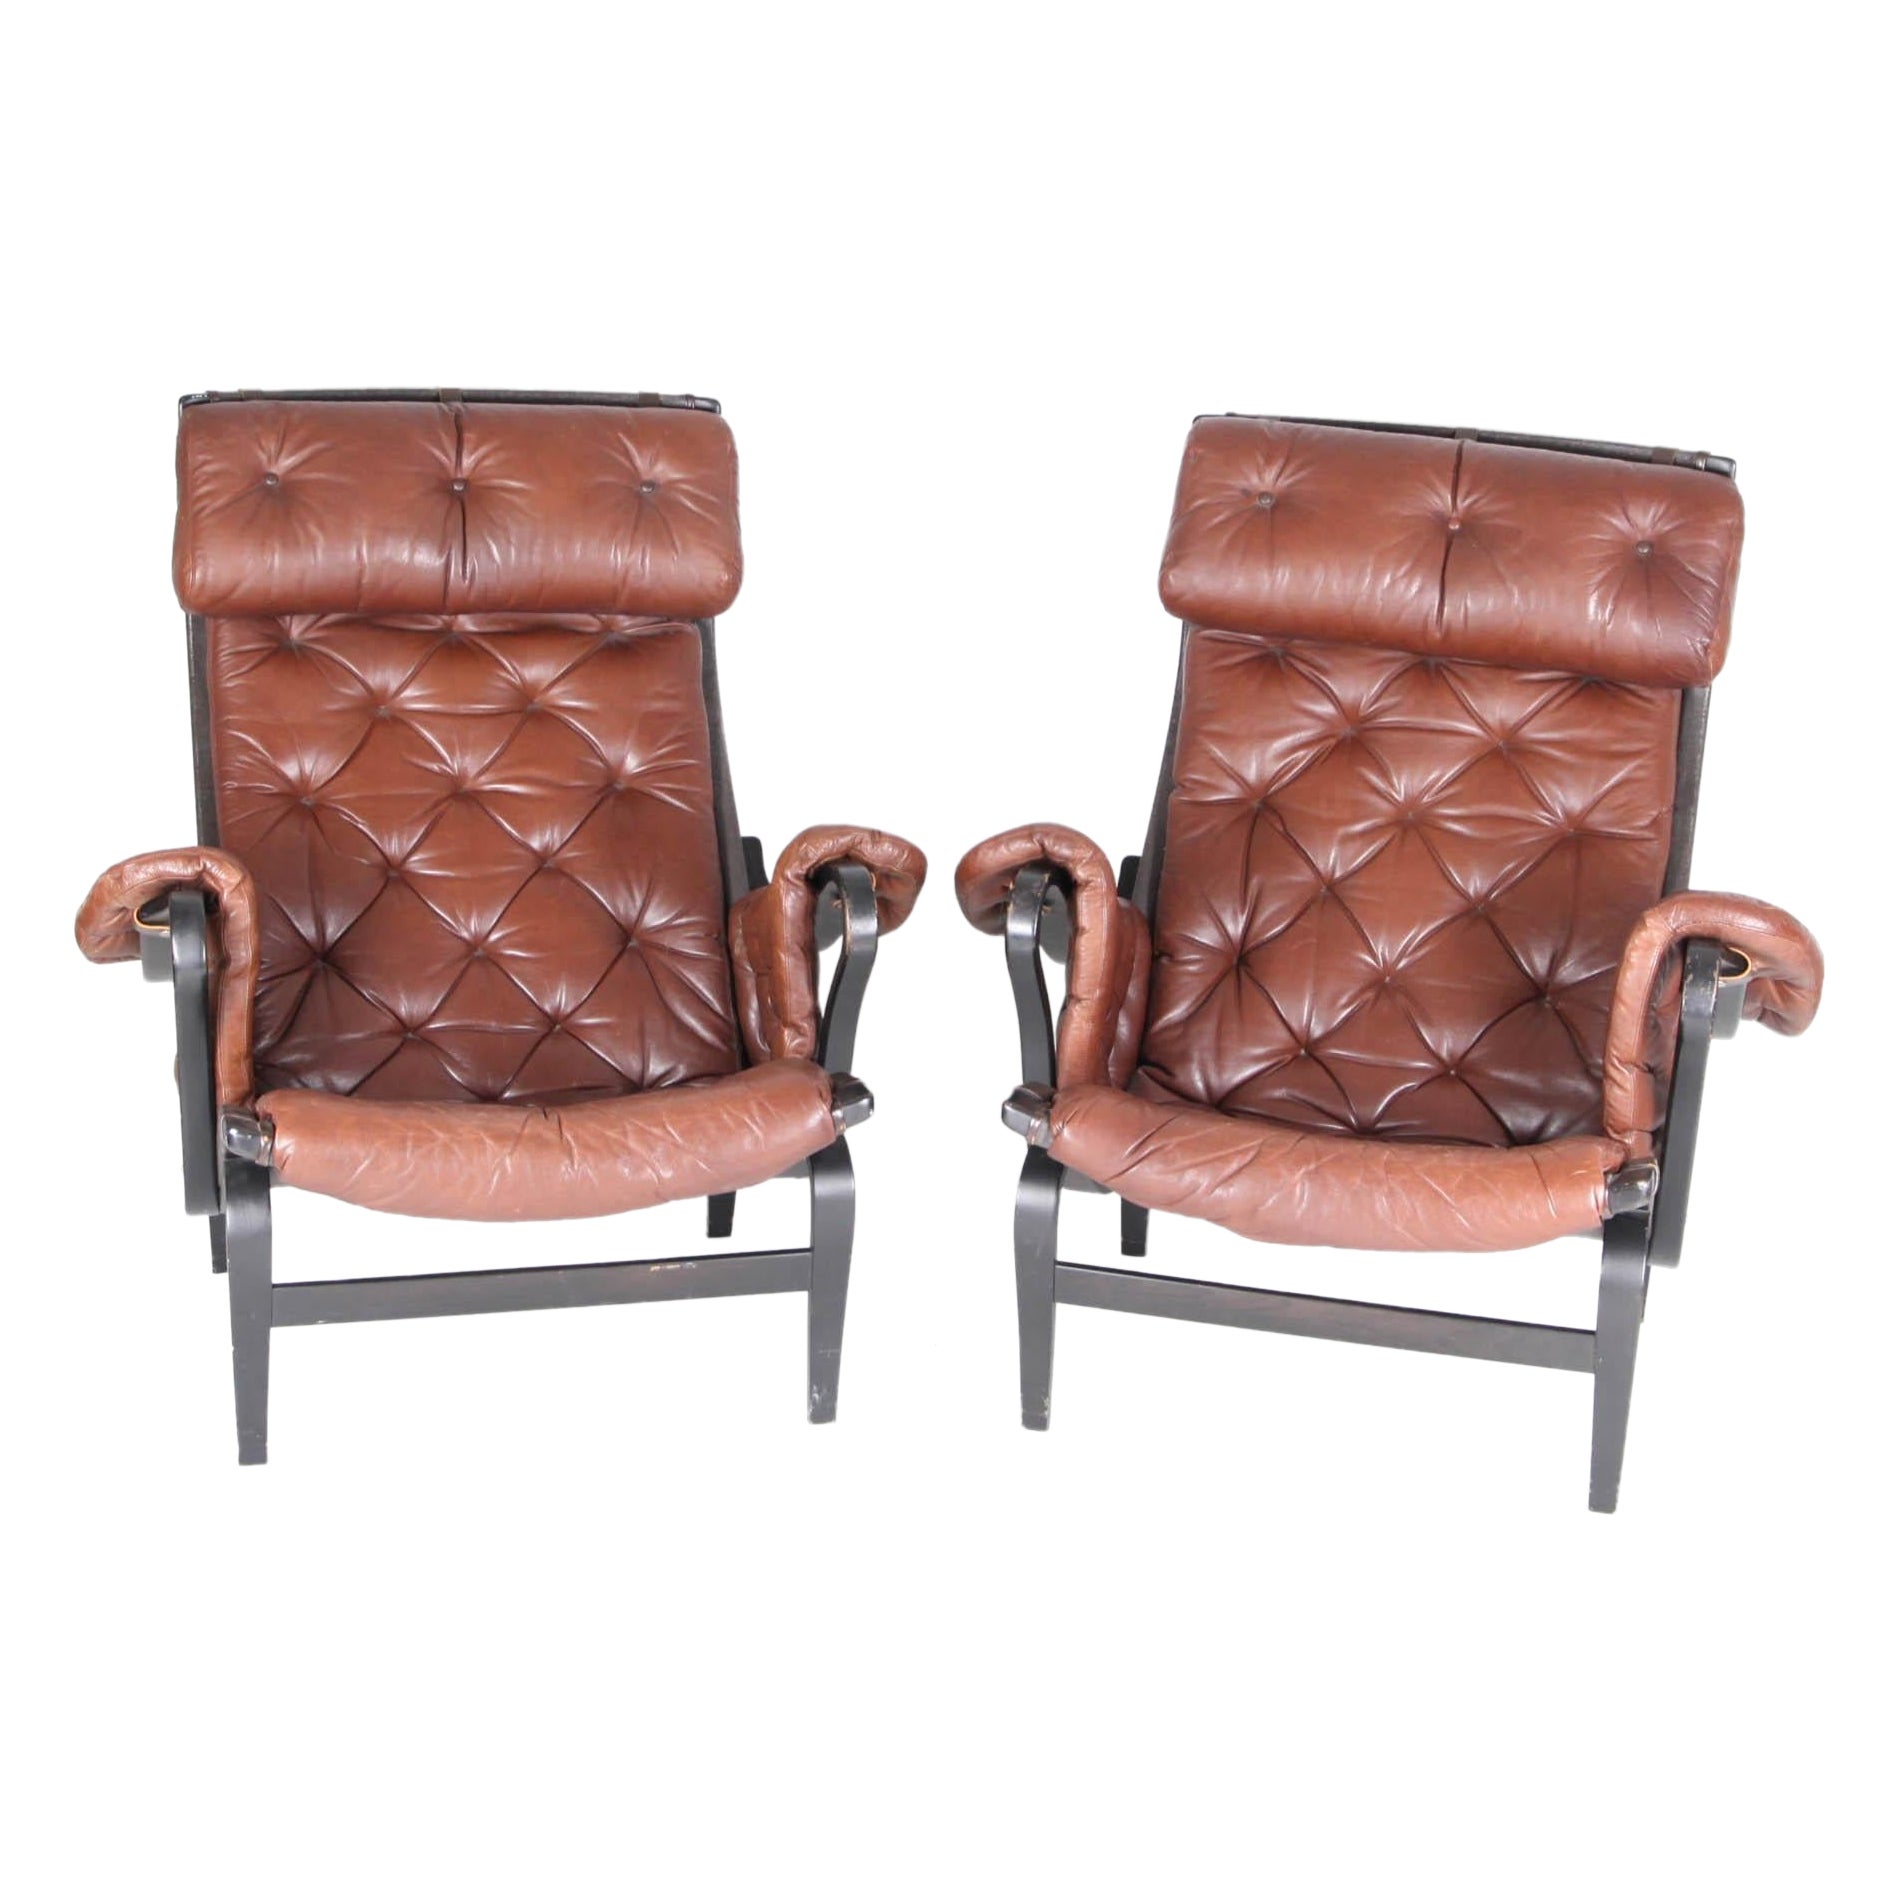 Pair of "Pernilla" Armchairs by Bruno Mathsson